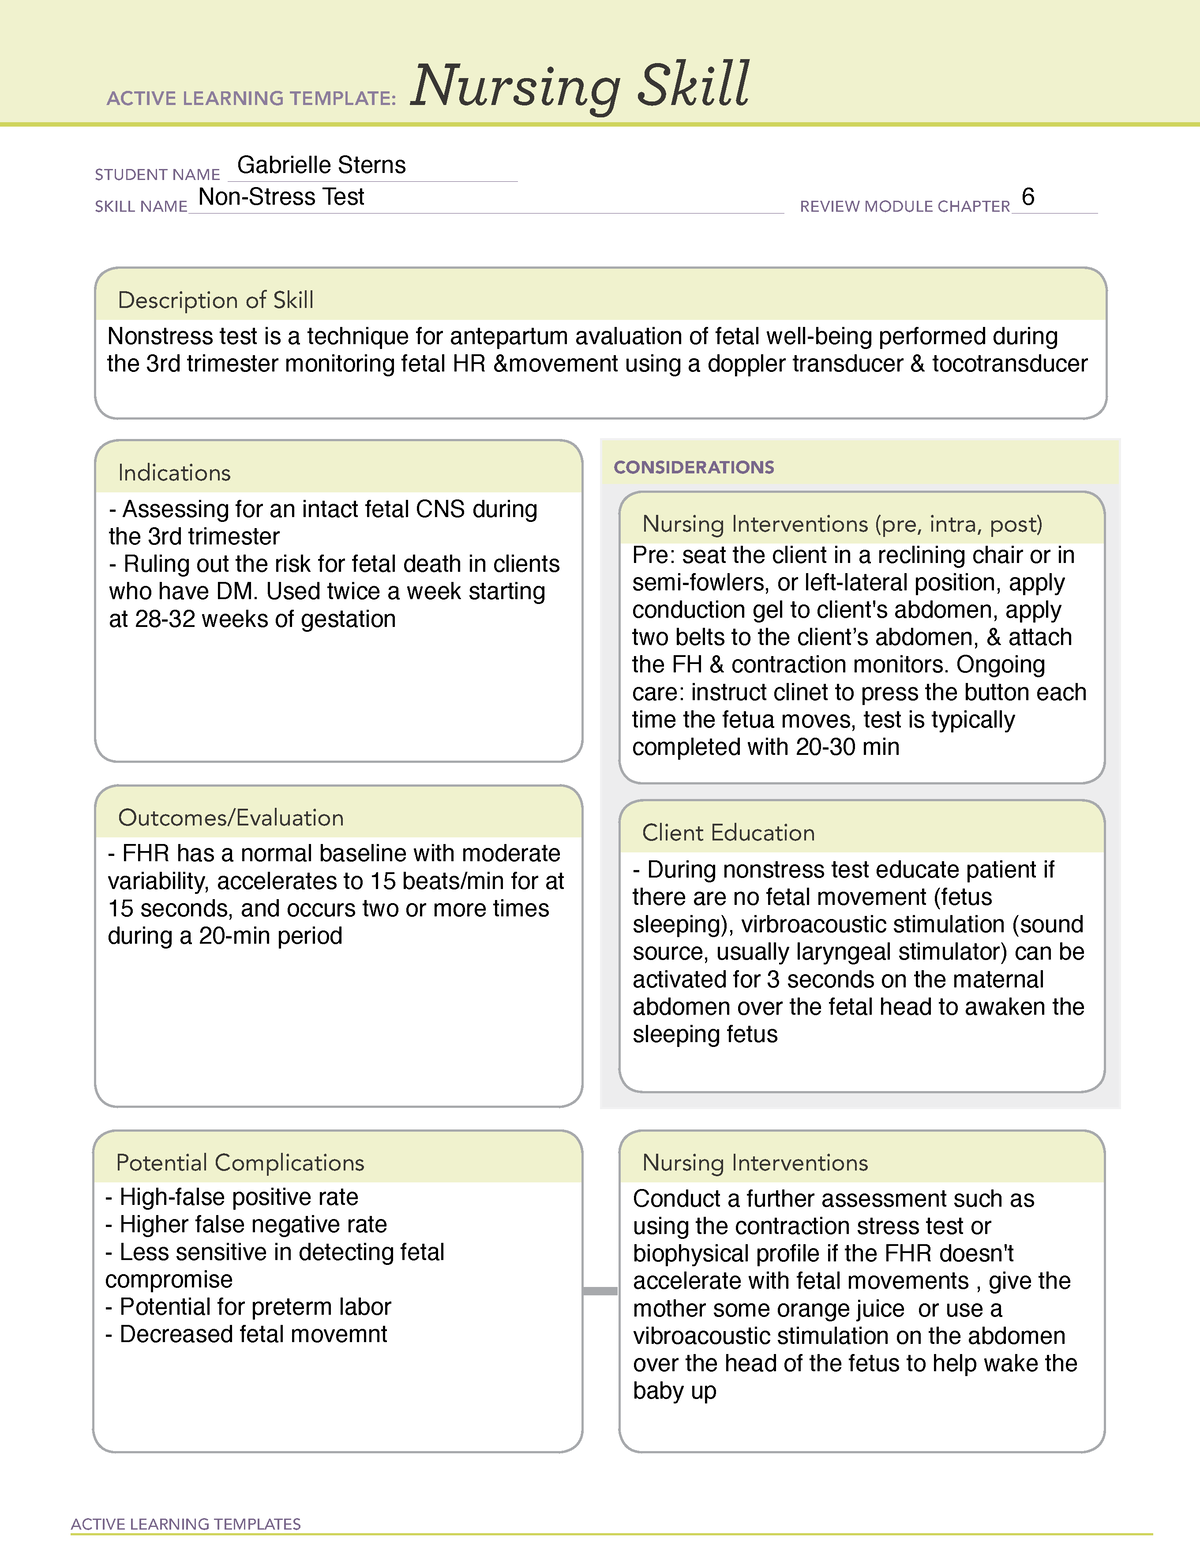 Active Learning Template Nursing Skill- Non-stress test - ACTIVE ...